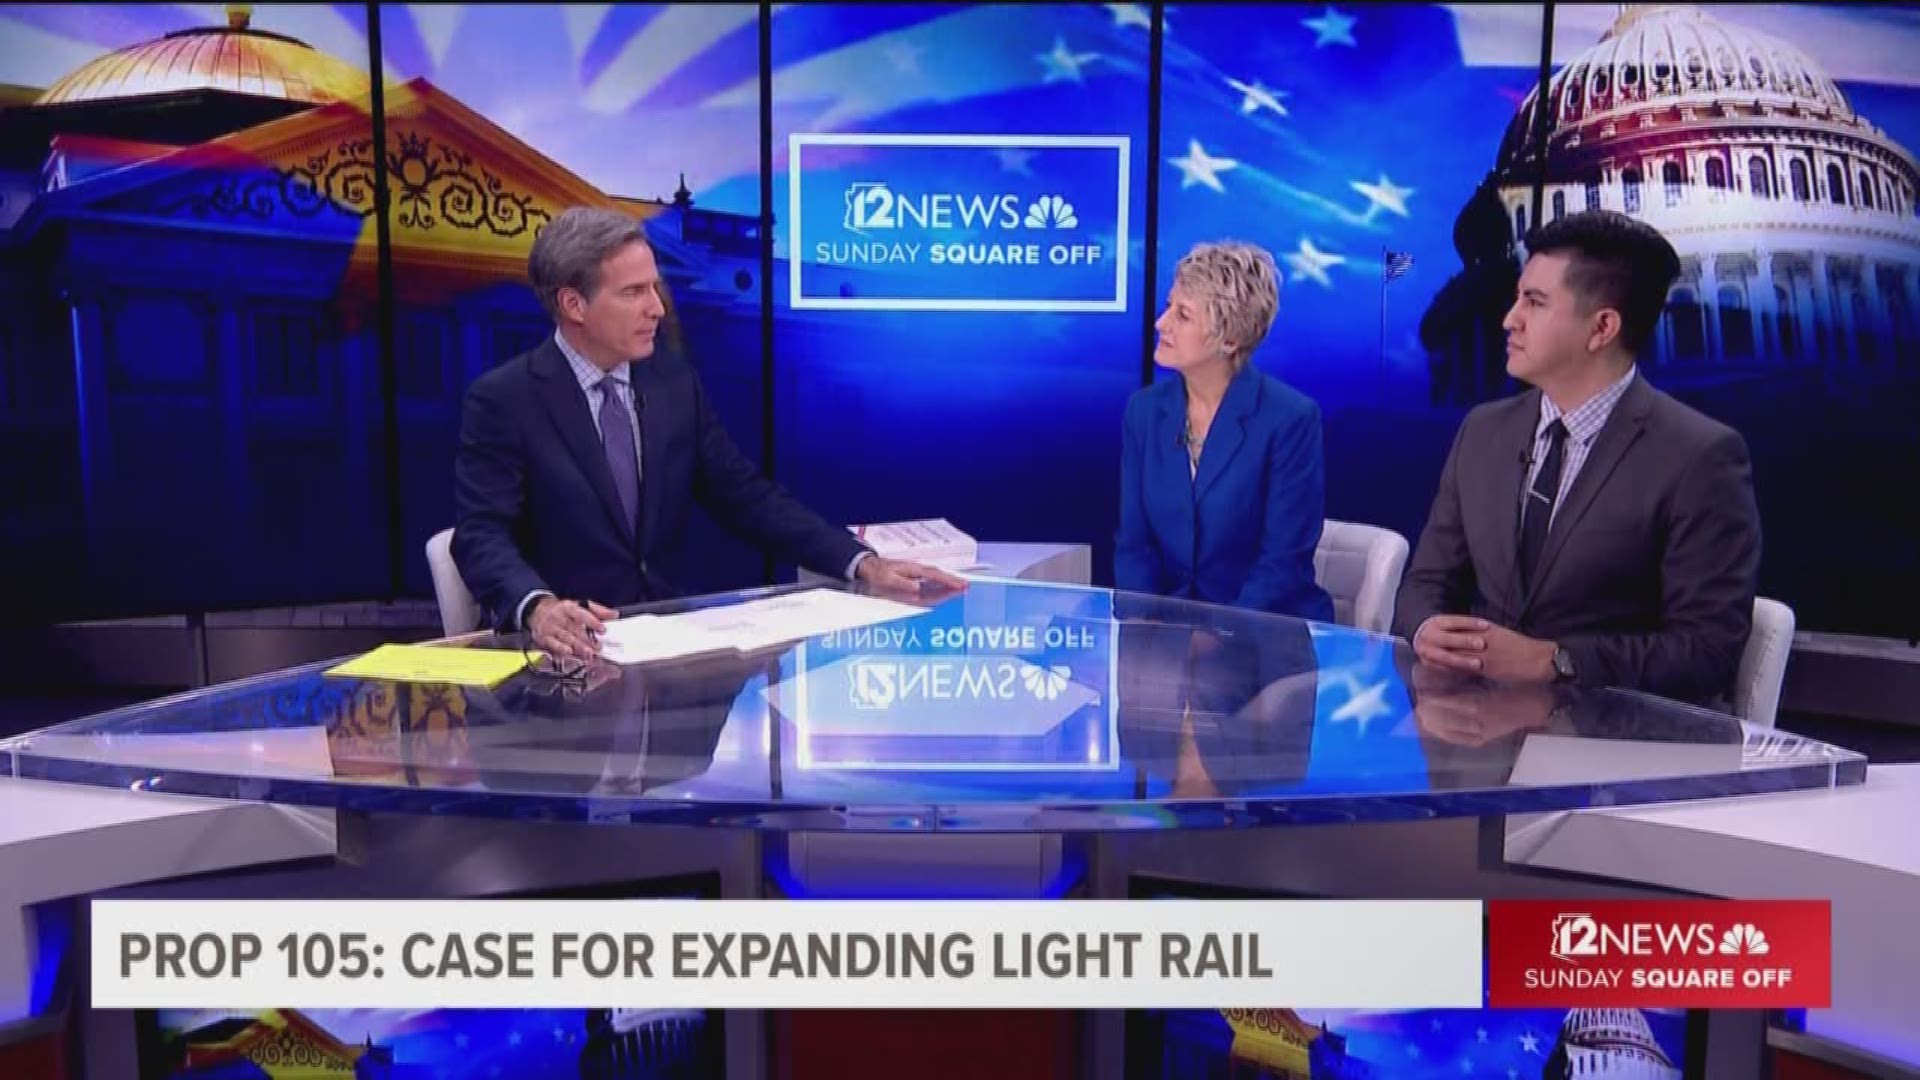 We debate the impact of current and past light rail extensions on local business and communities.